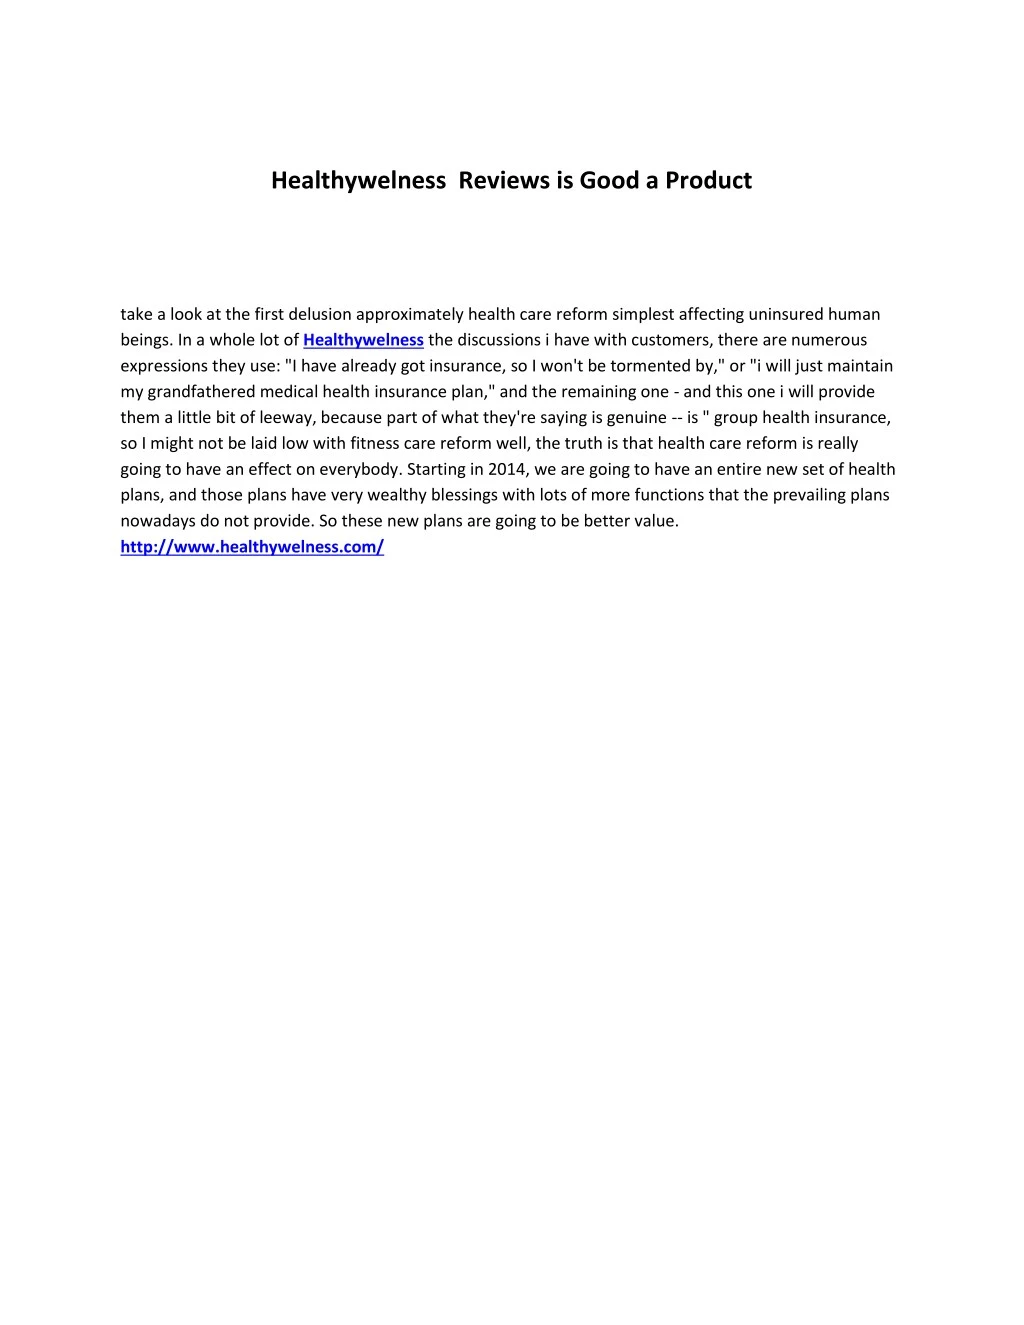 healthywelness reviews is good a product